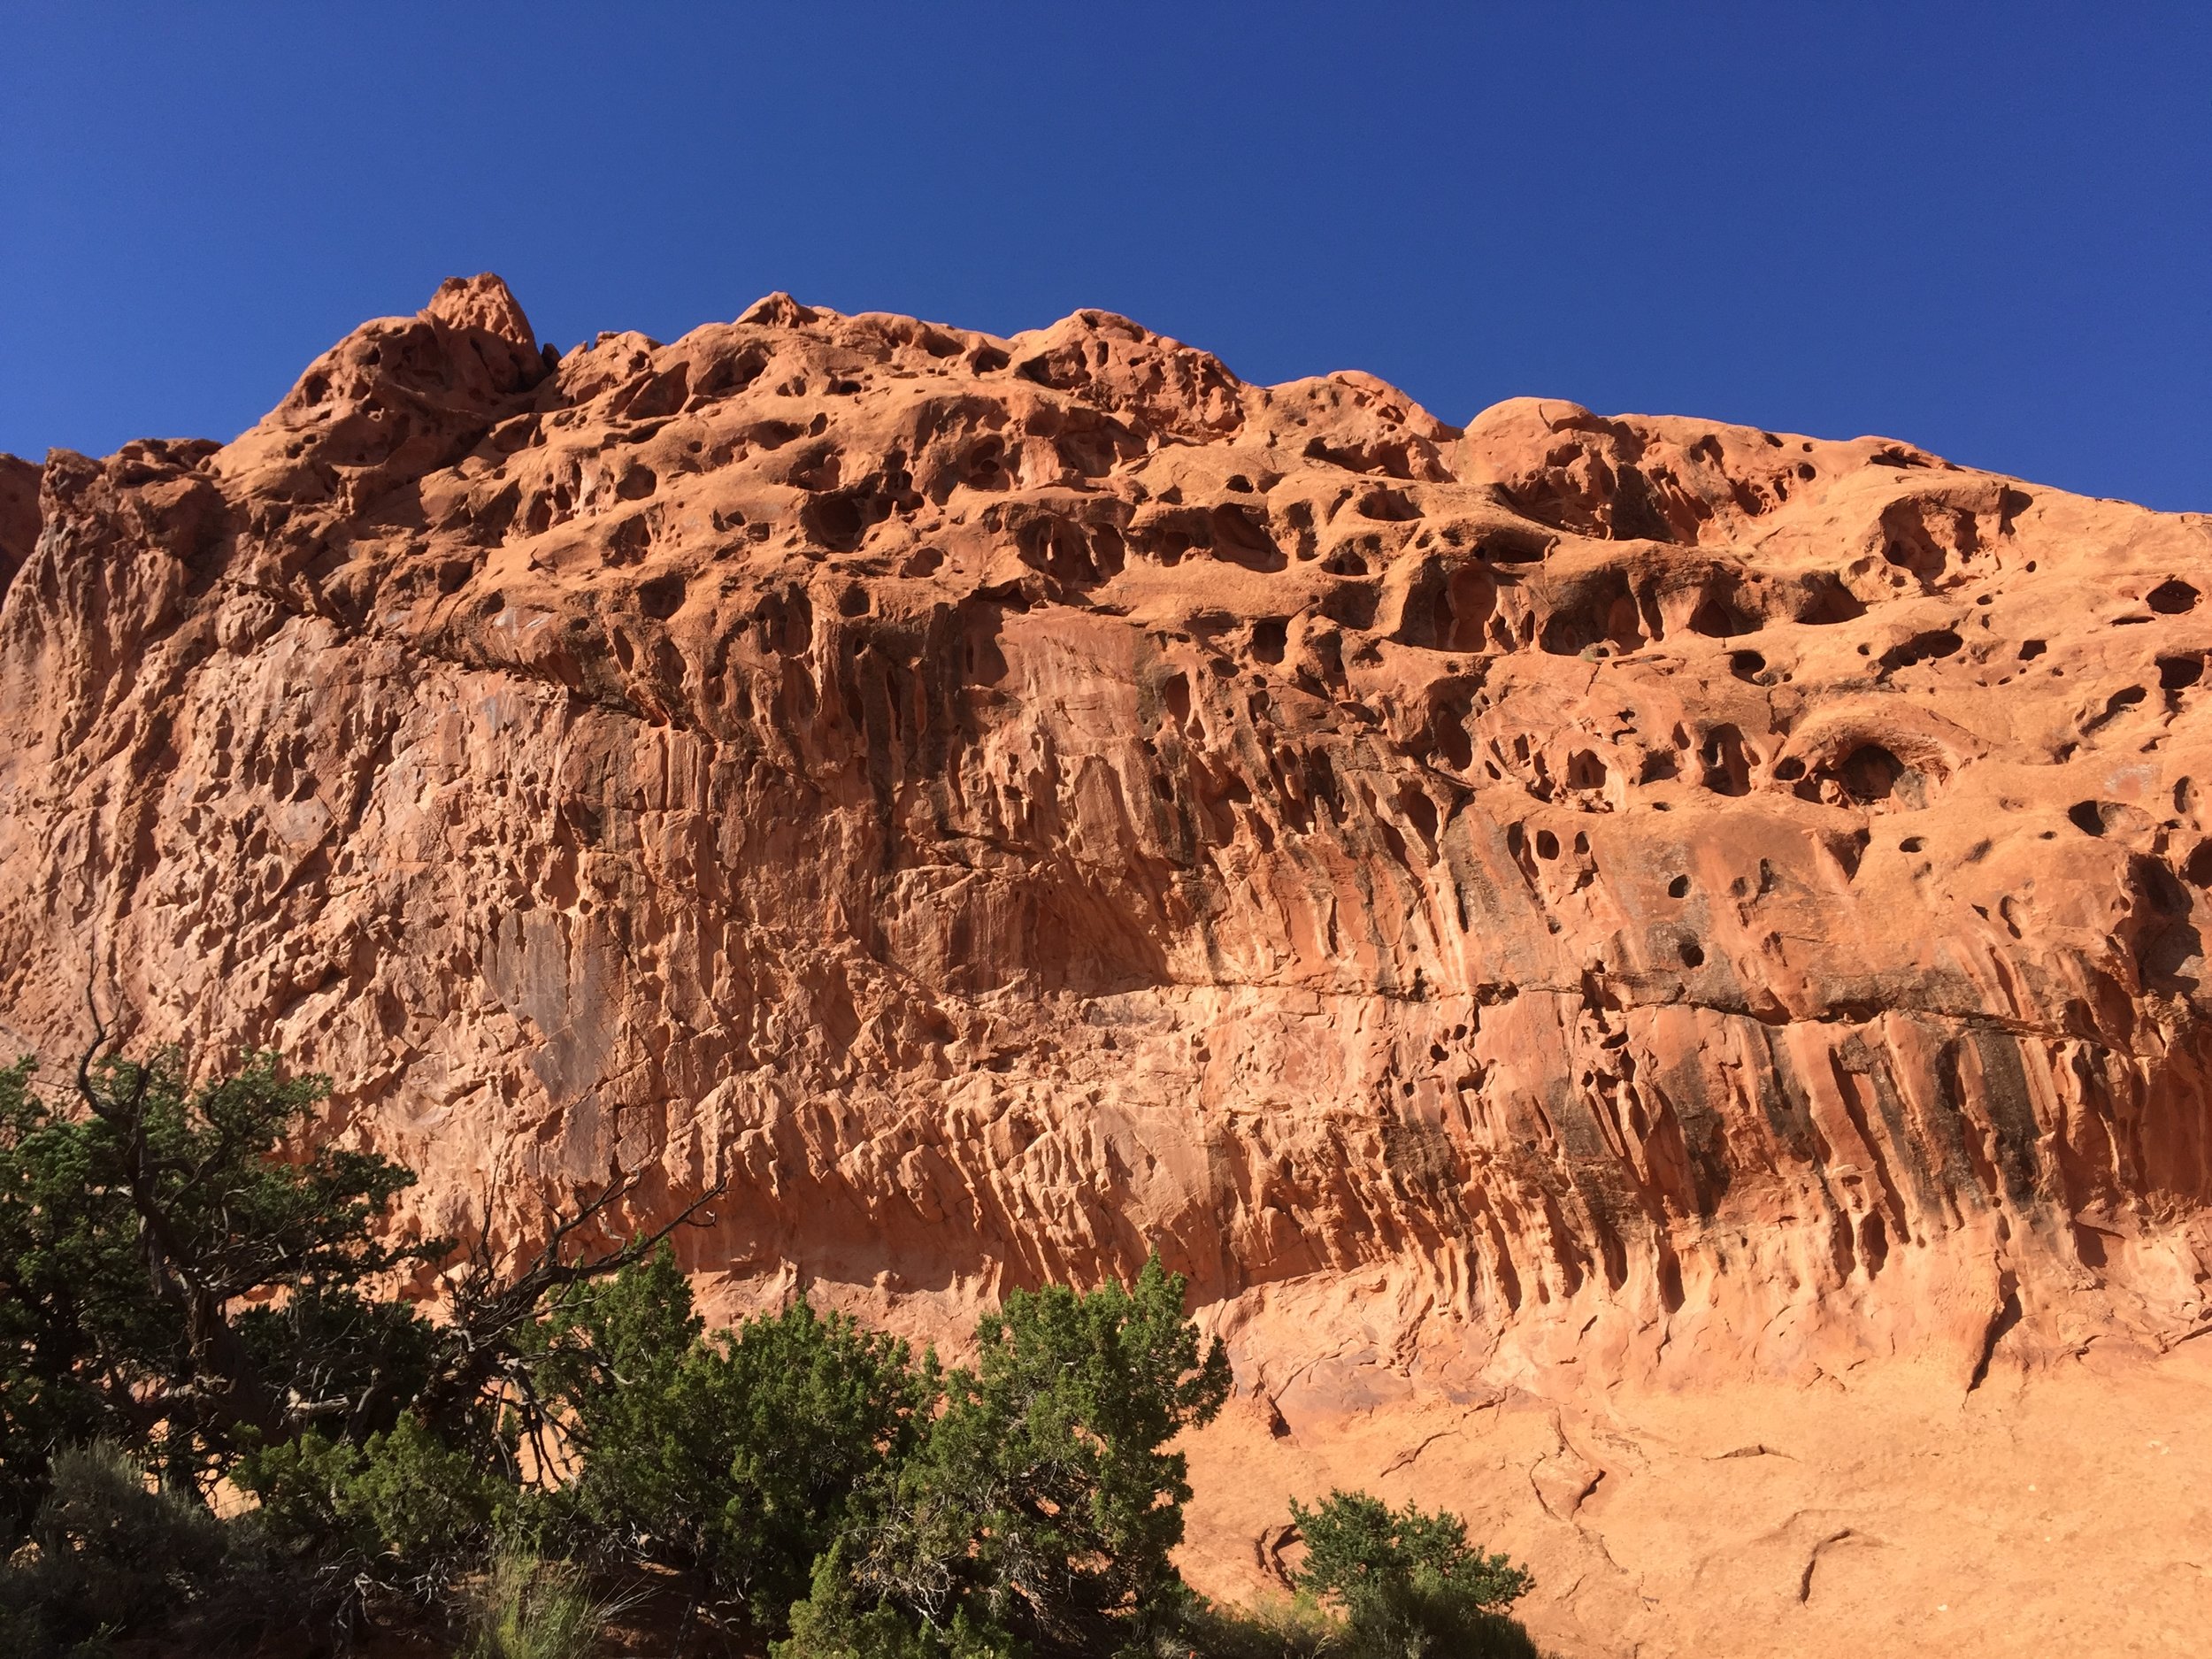 AUGUST, 2017 – CAPITOL REEF NATIONAL PARK: The bizarre nature of the rock formations can give you an other-worldly feeling as you walk through a landscape as silent as this desert.